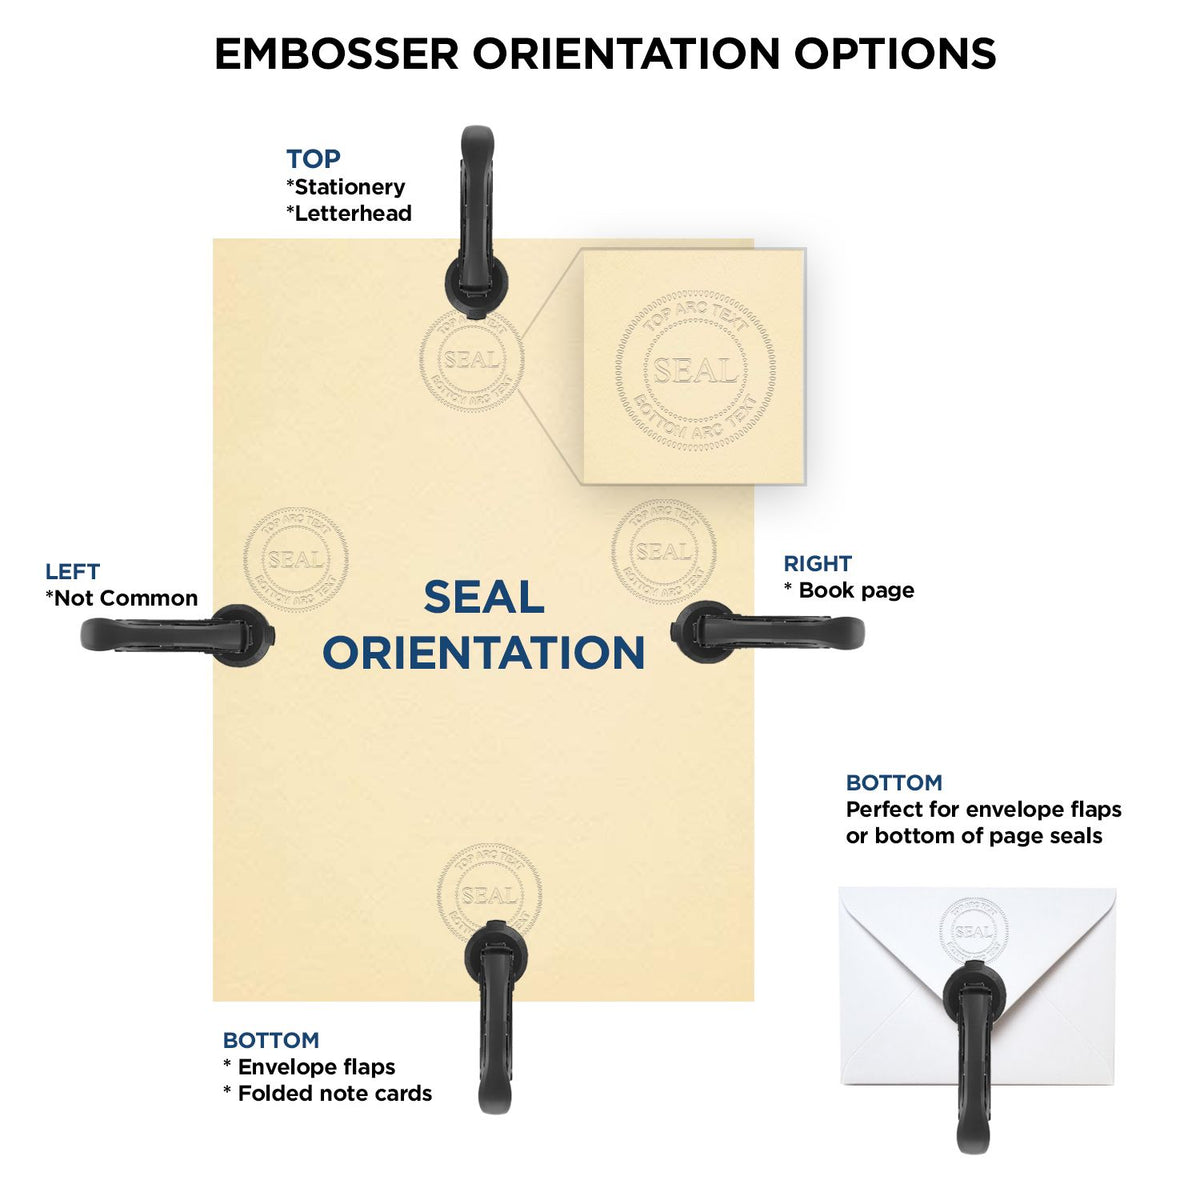 An infographic for the Gift Guam Architect Seal showing embosser orientation, this is showing examples of a top, bottom, right and left insert.